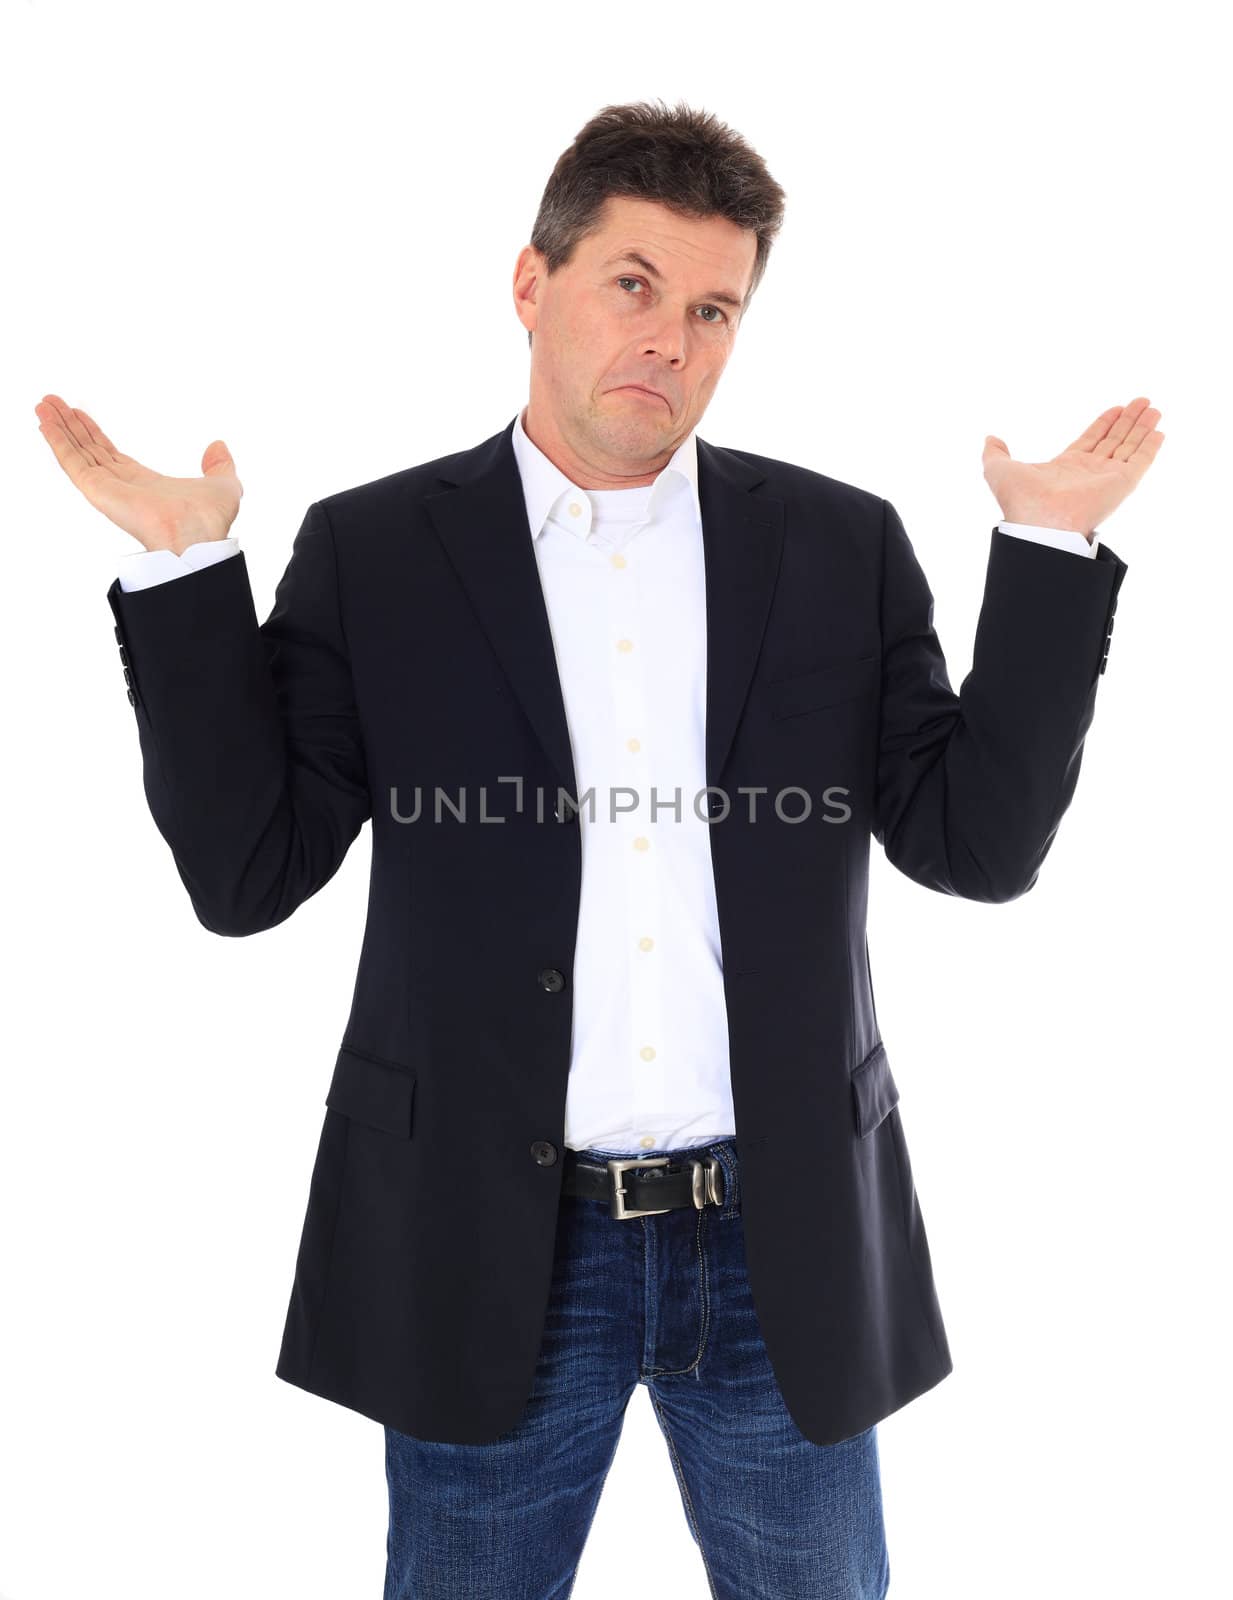 Clueless middle-aged man. All on white background.